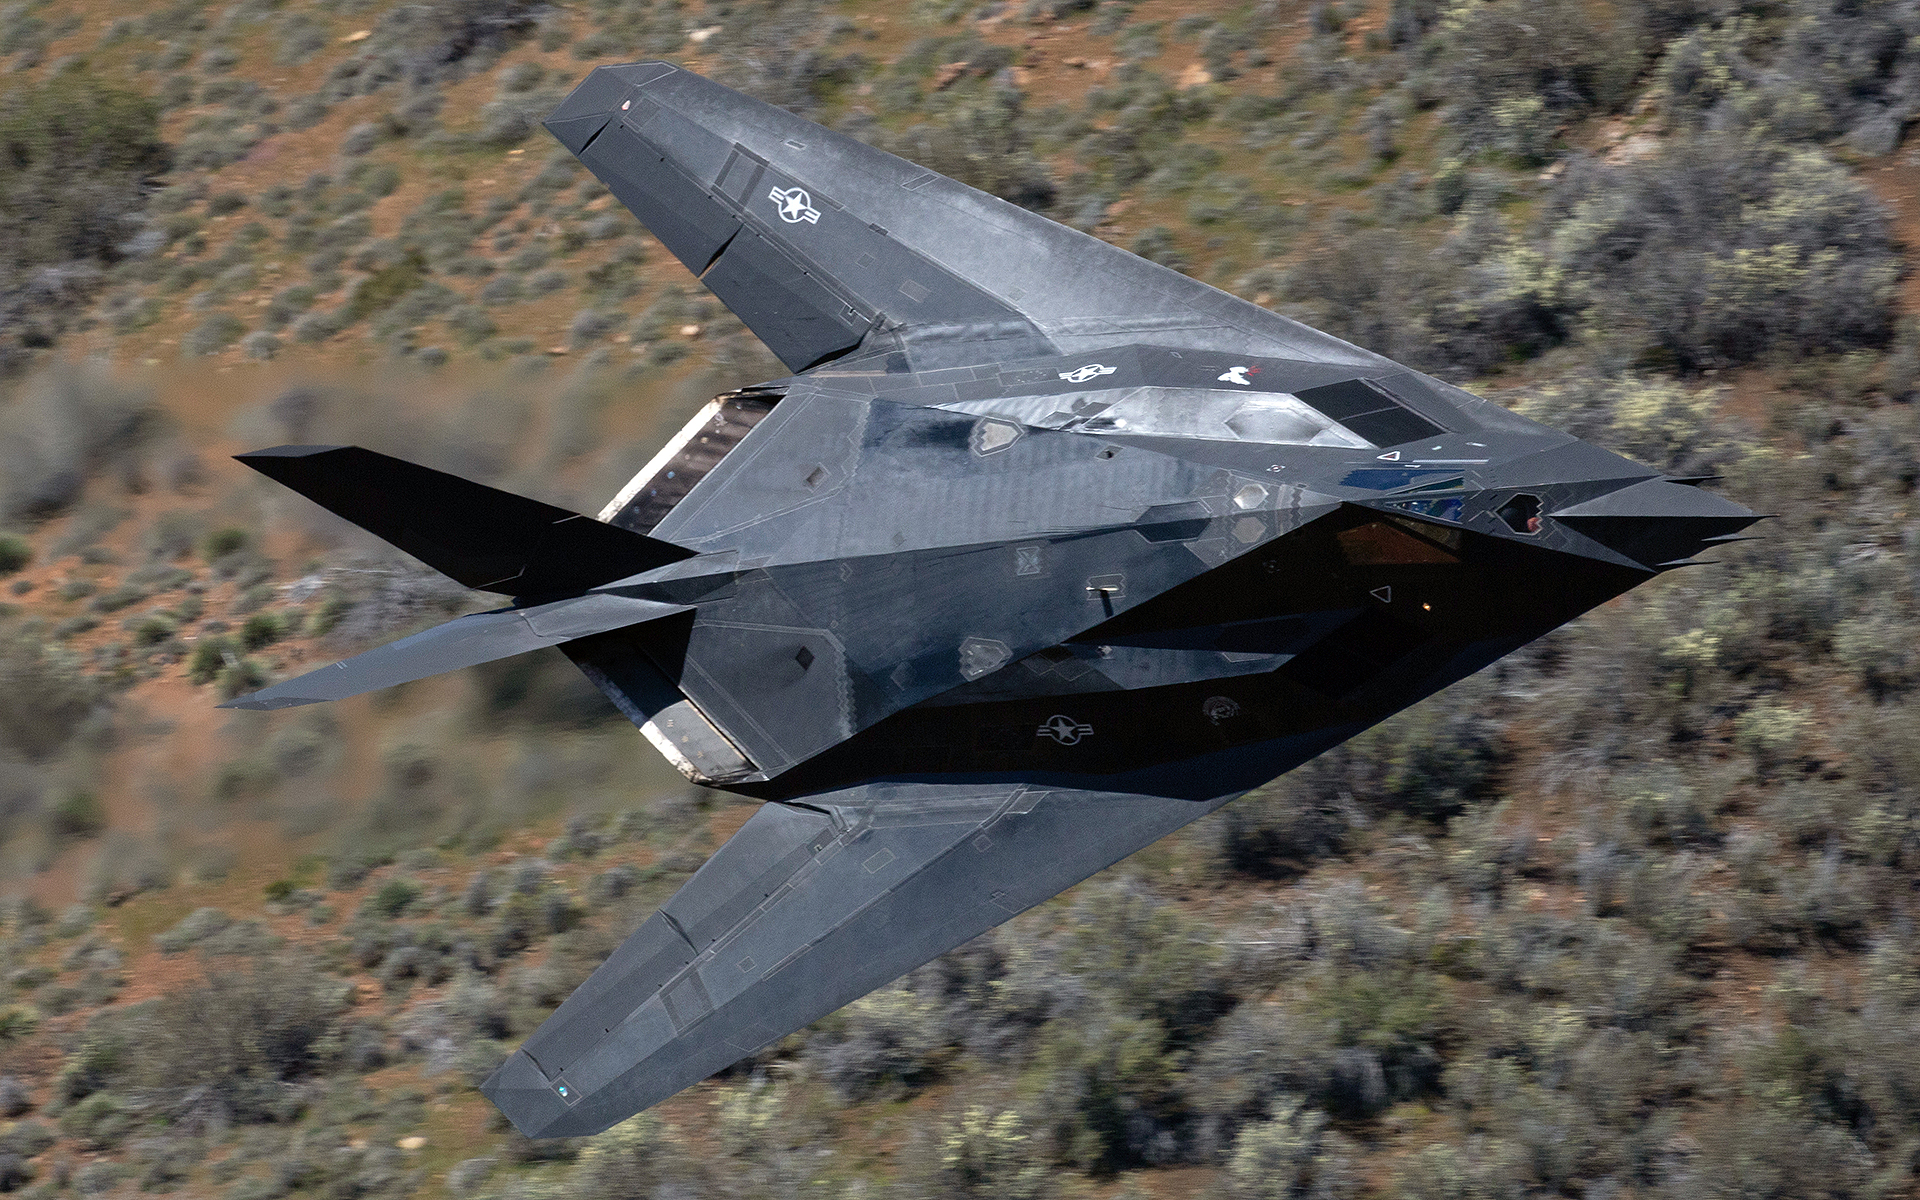 F-117 Nighthawks Caught Roaring Through A Canyon In Awesome Images